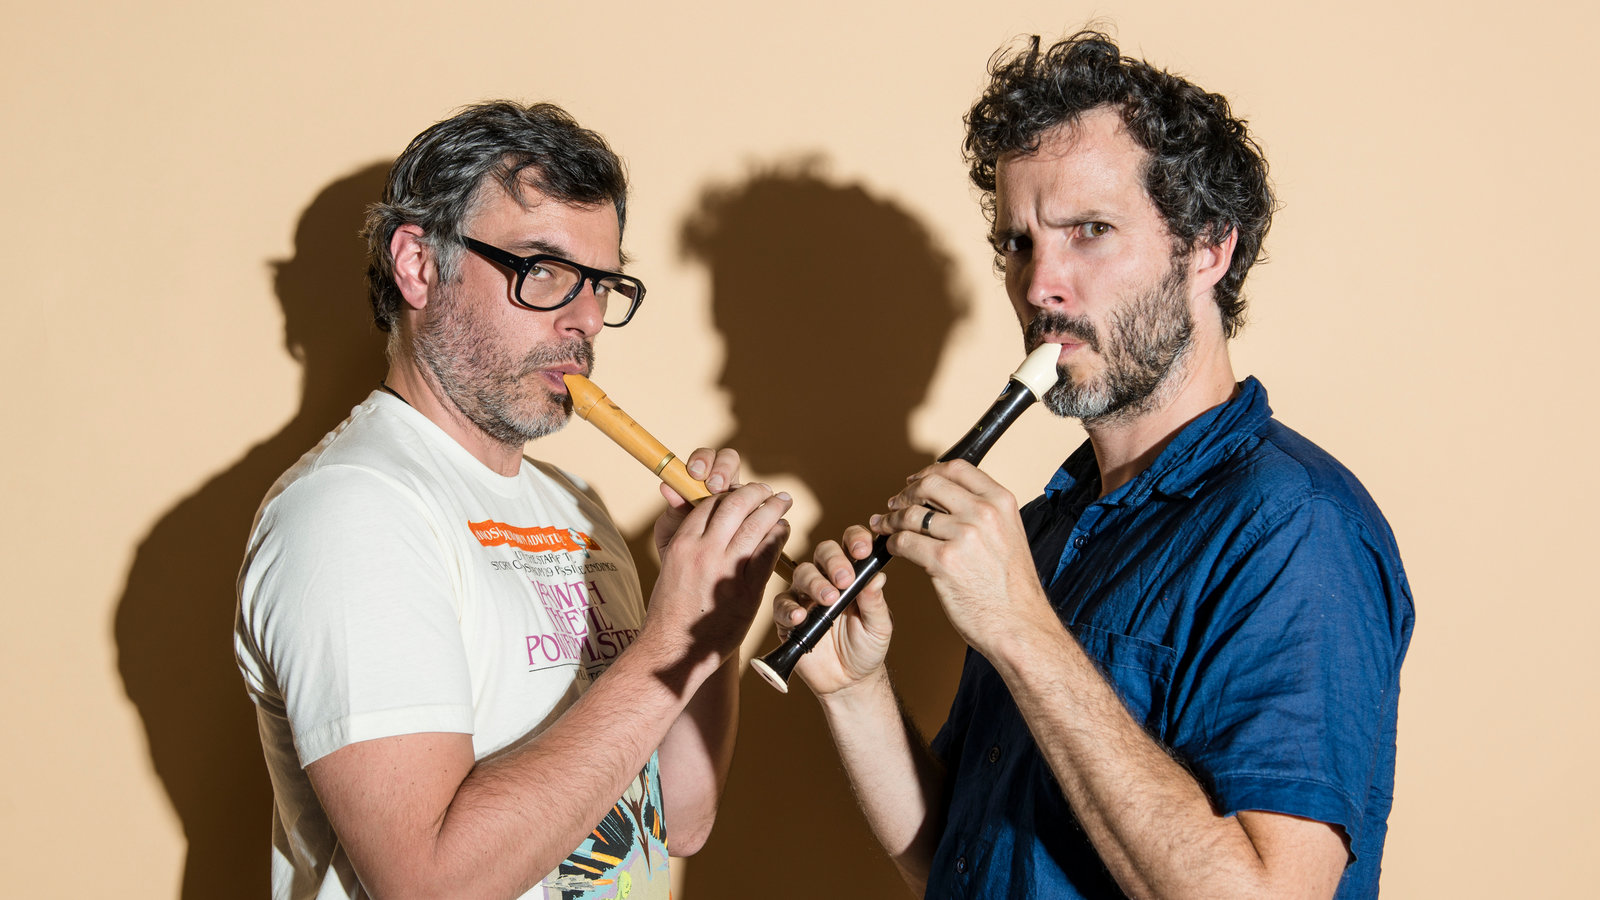  Bret McKenzie and Jemaine Clement pose with instruments for their comedy sketch show.
